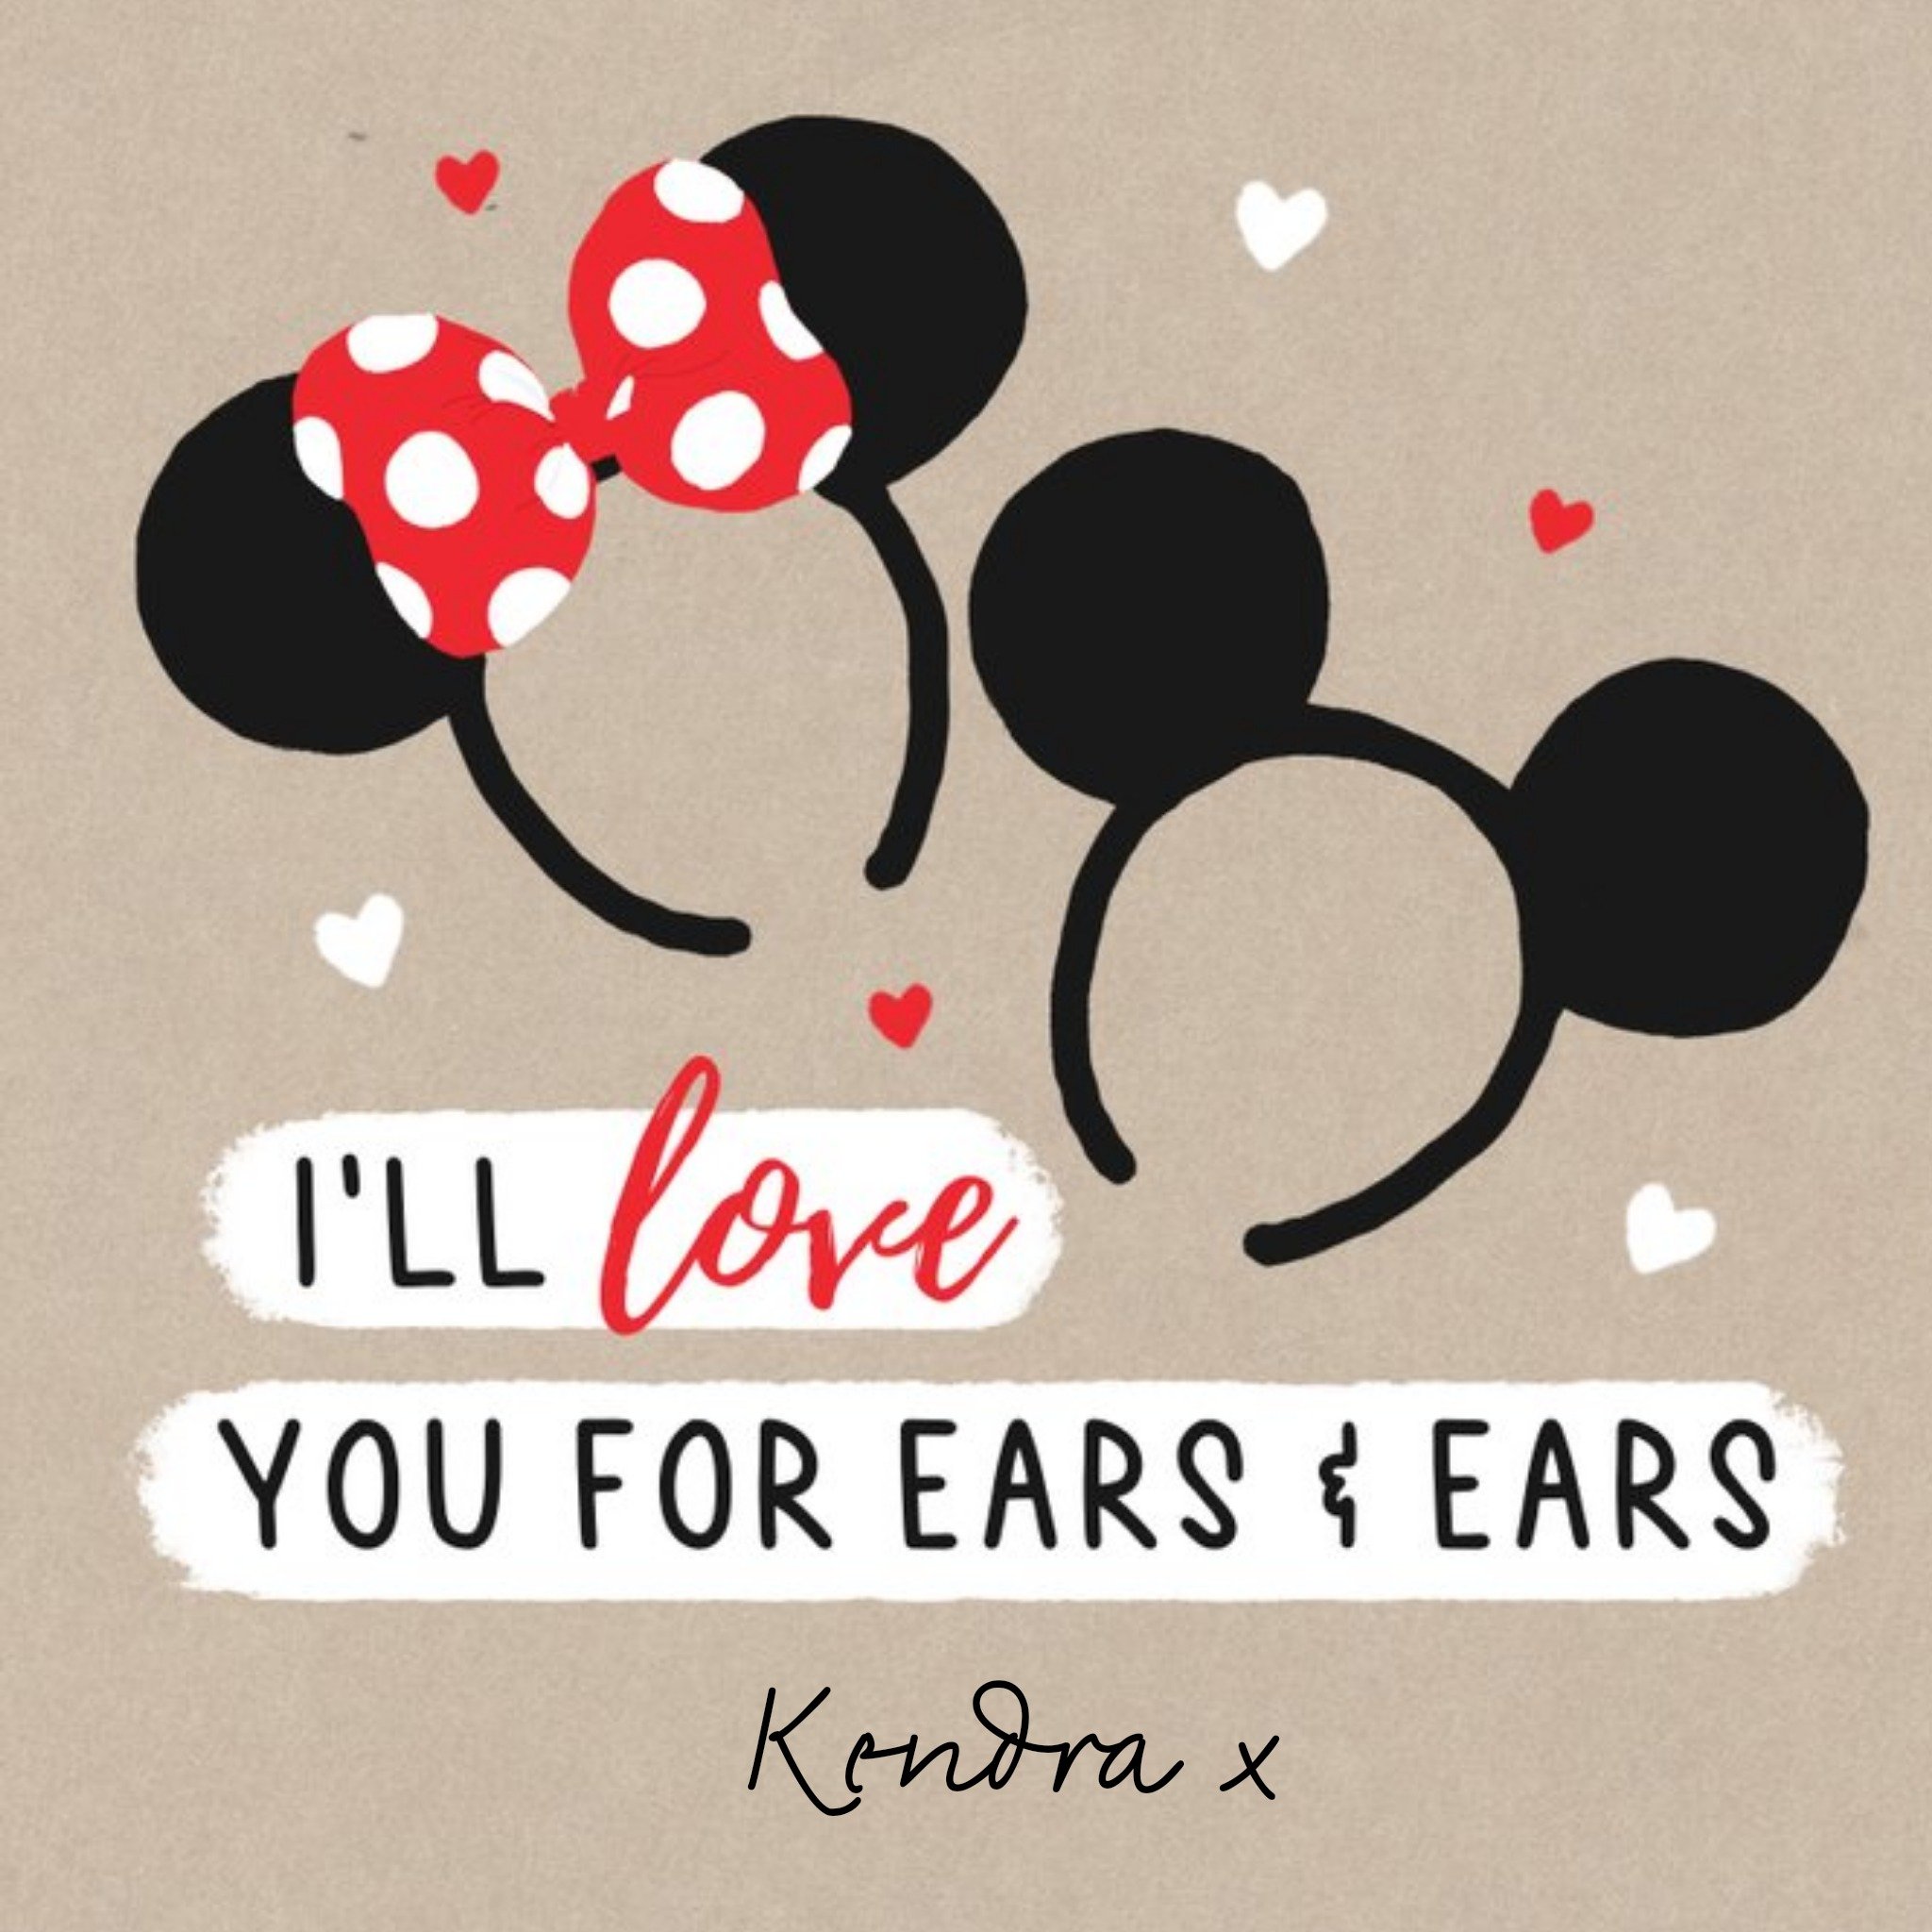 Mickey Mouse Disney I'll Love You For Ears & Ears Card, Square